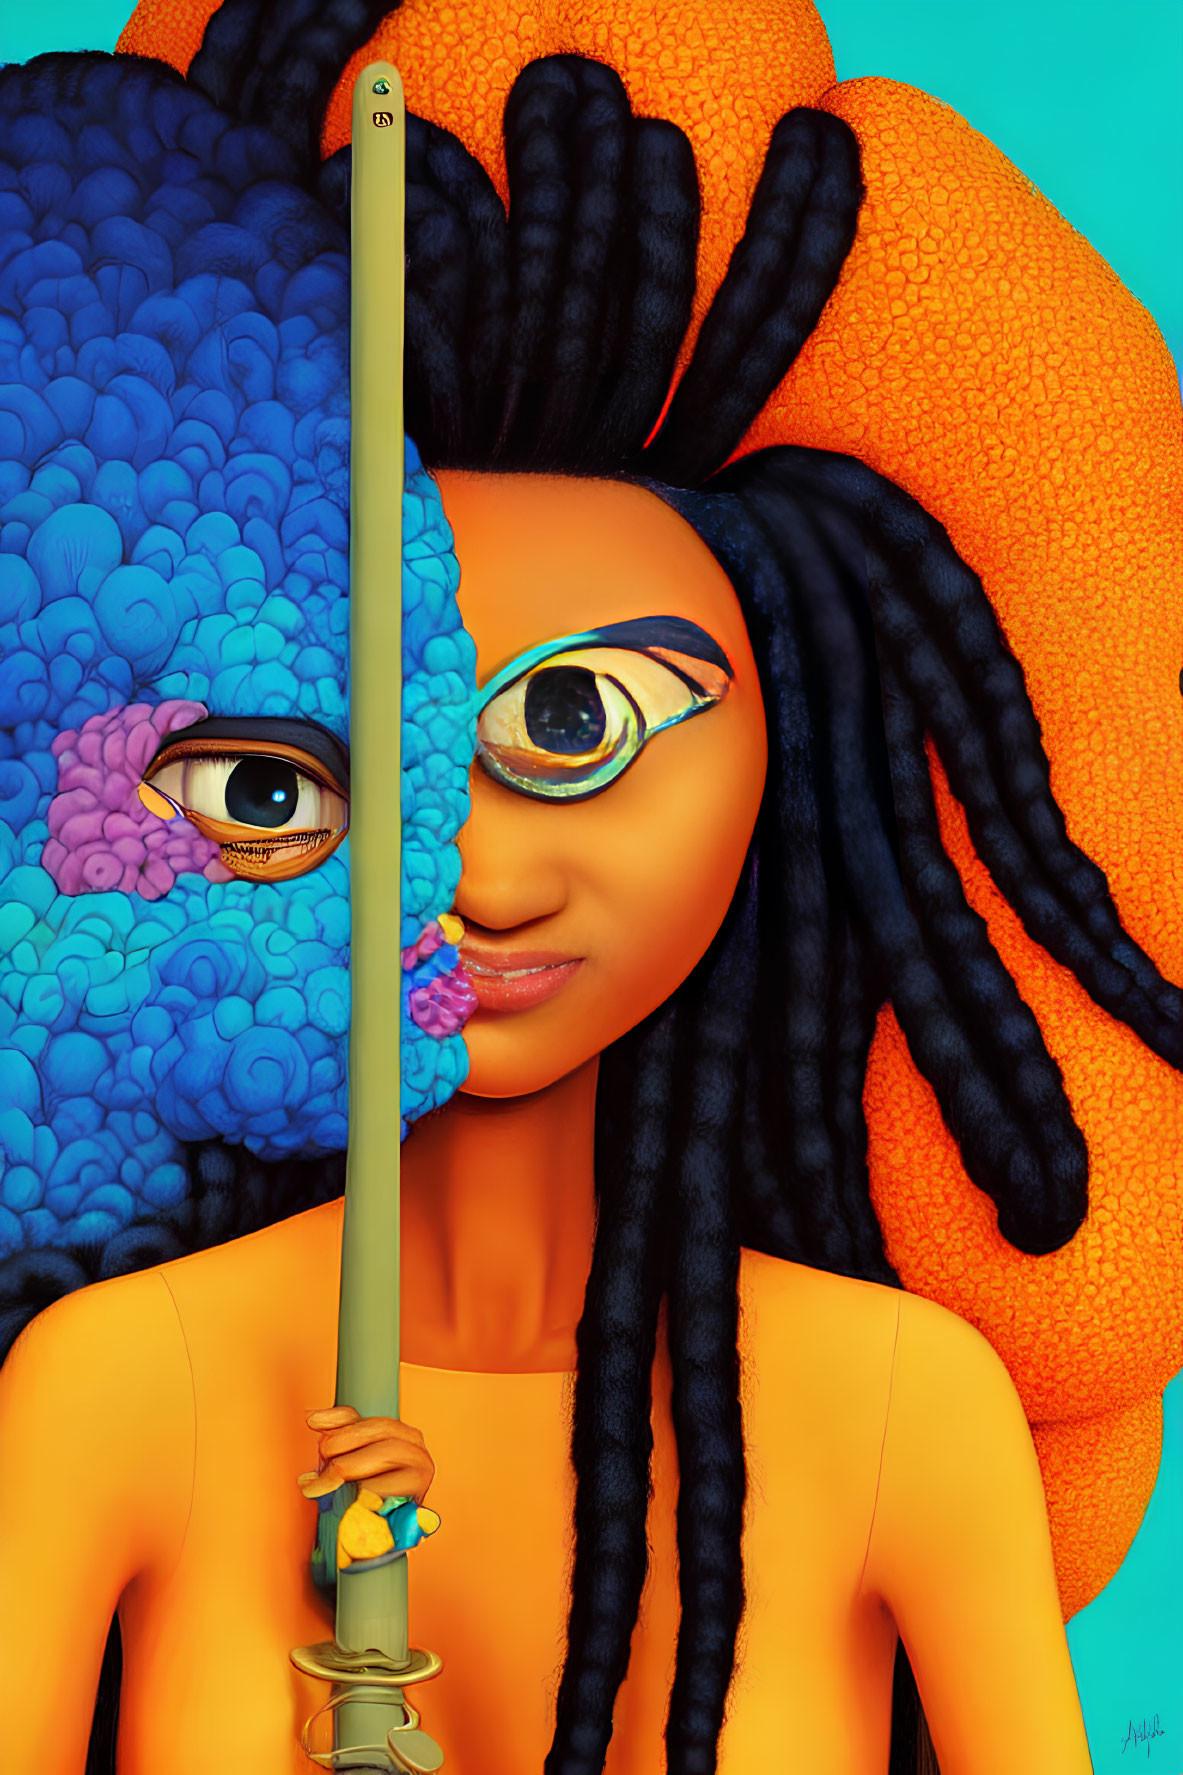 Illustration of person with vibrant orange and blue hair holding a sword in front of one eye.